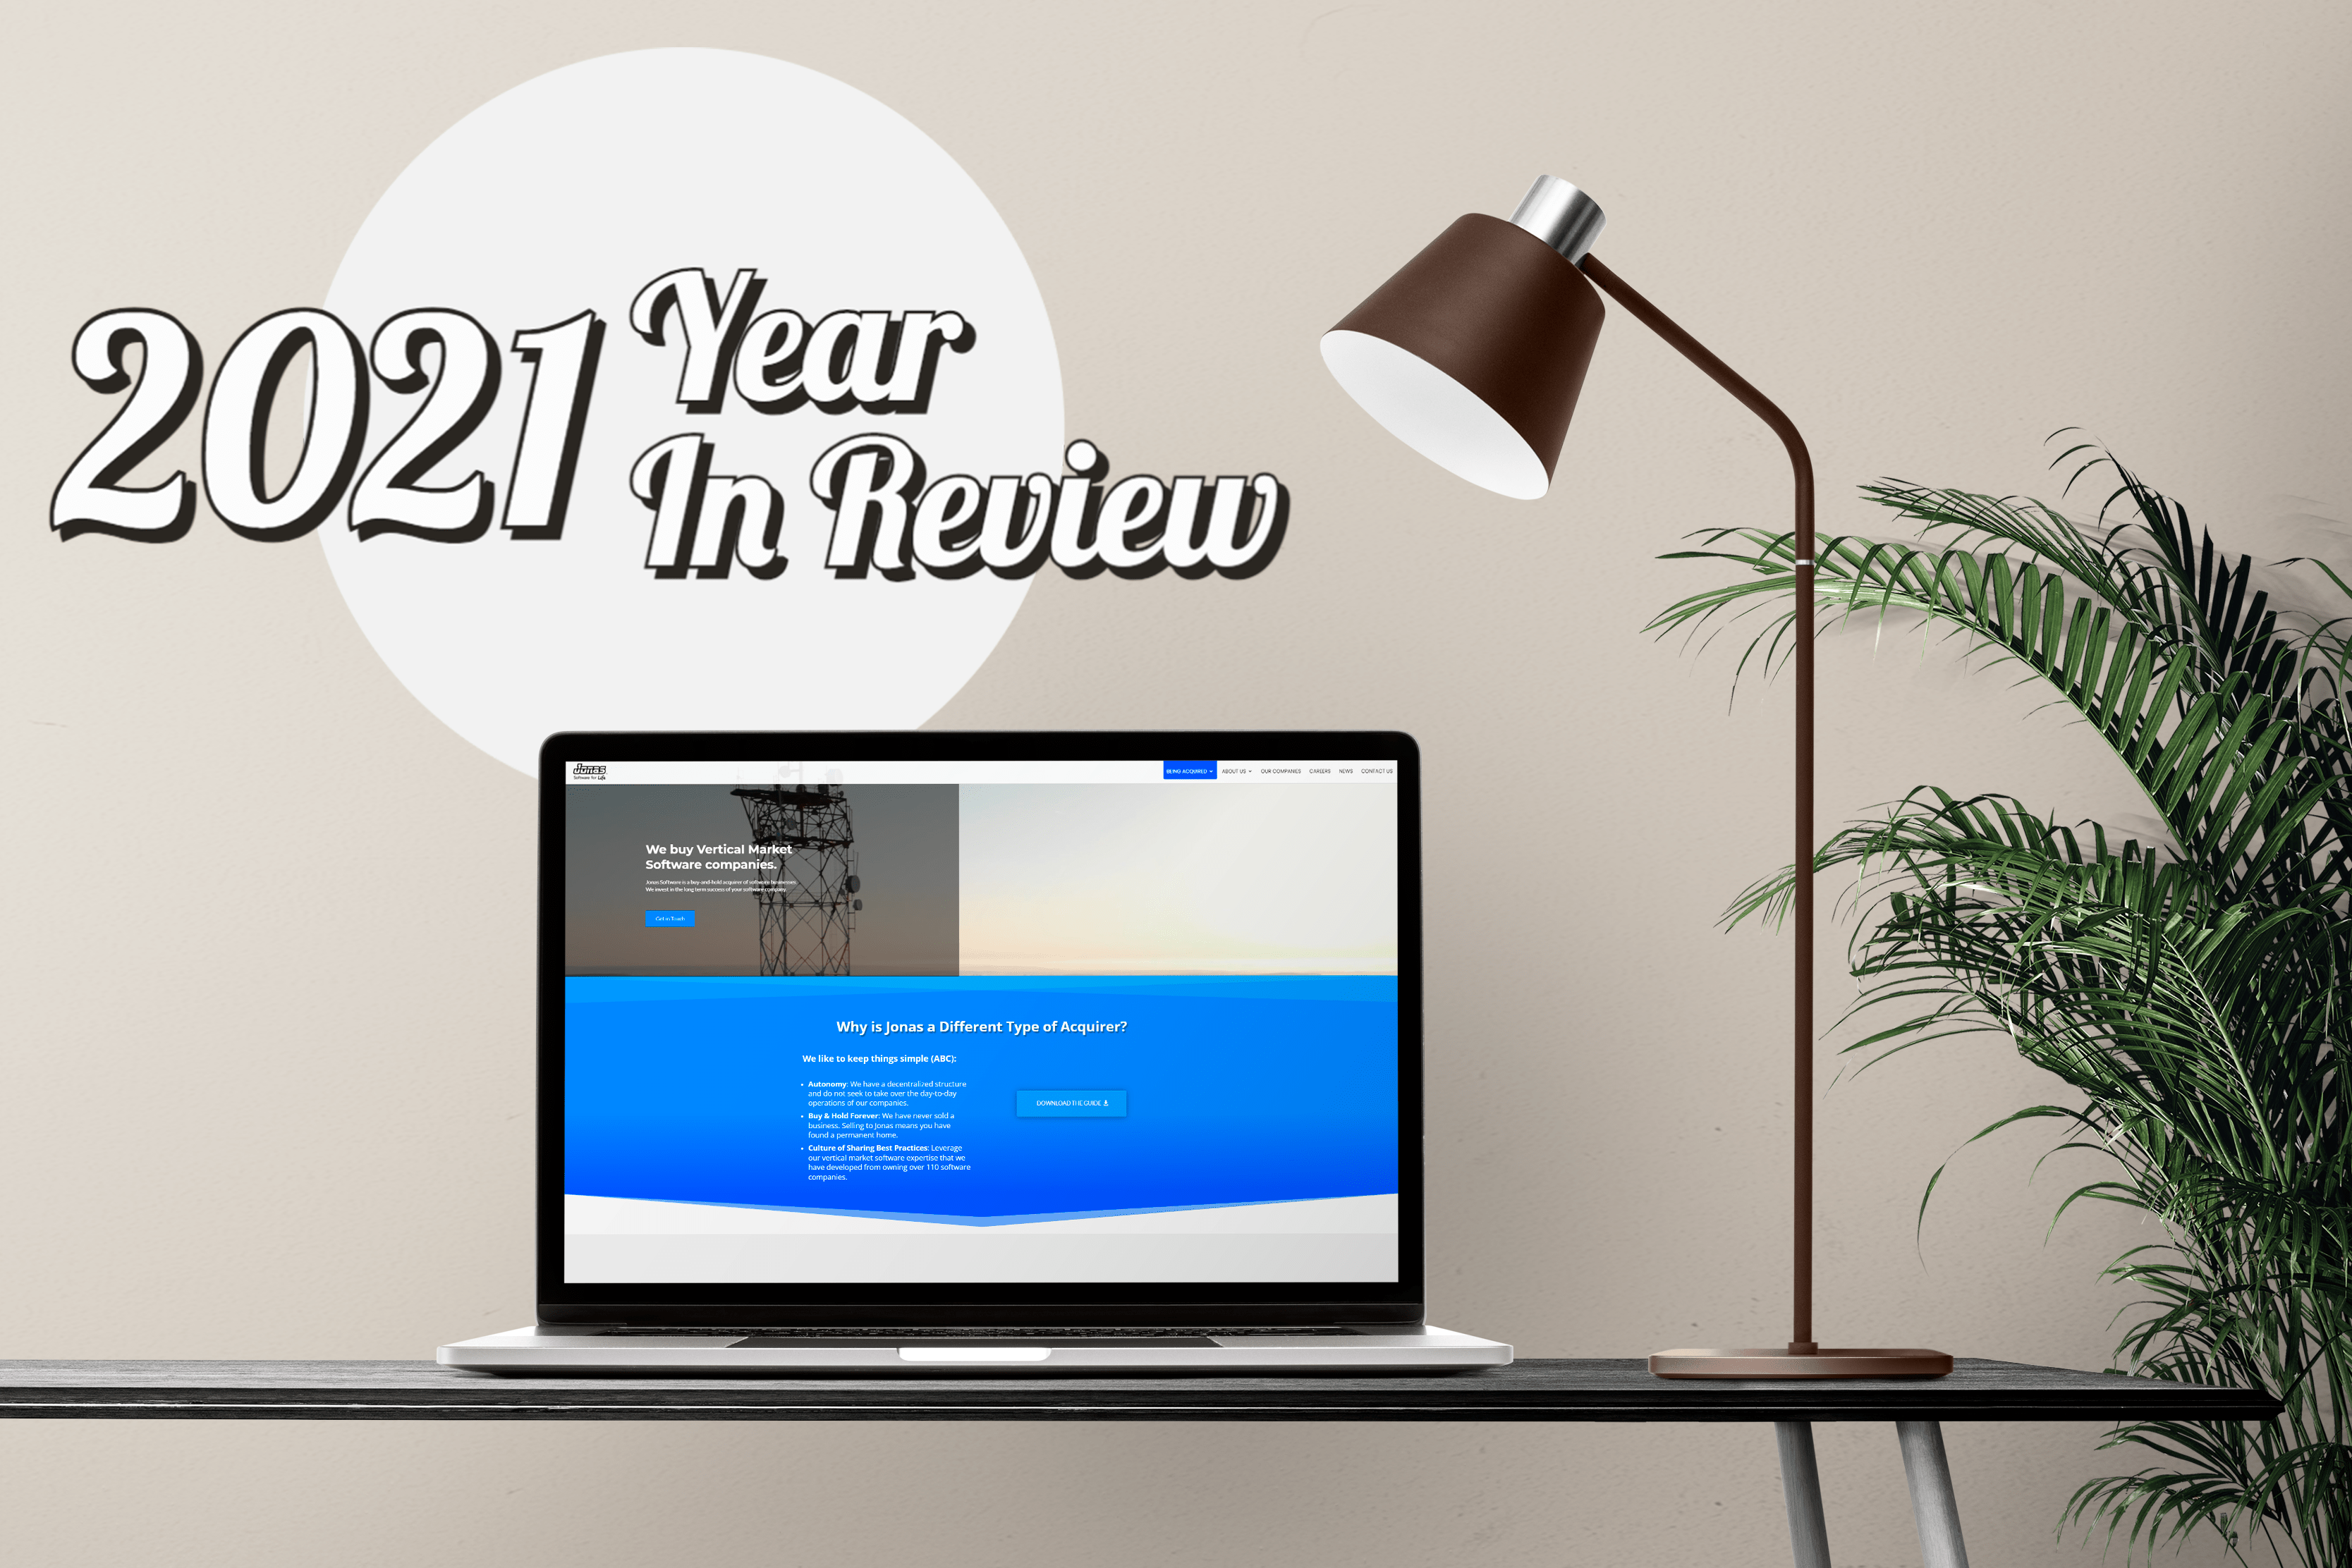 Jonas Software 2021 Year in Review